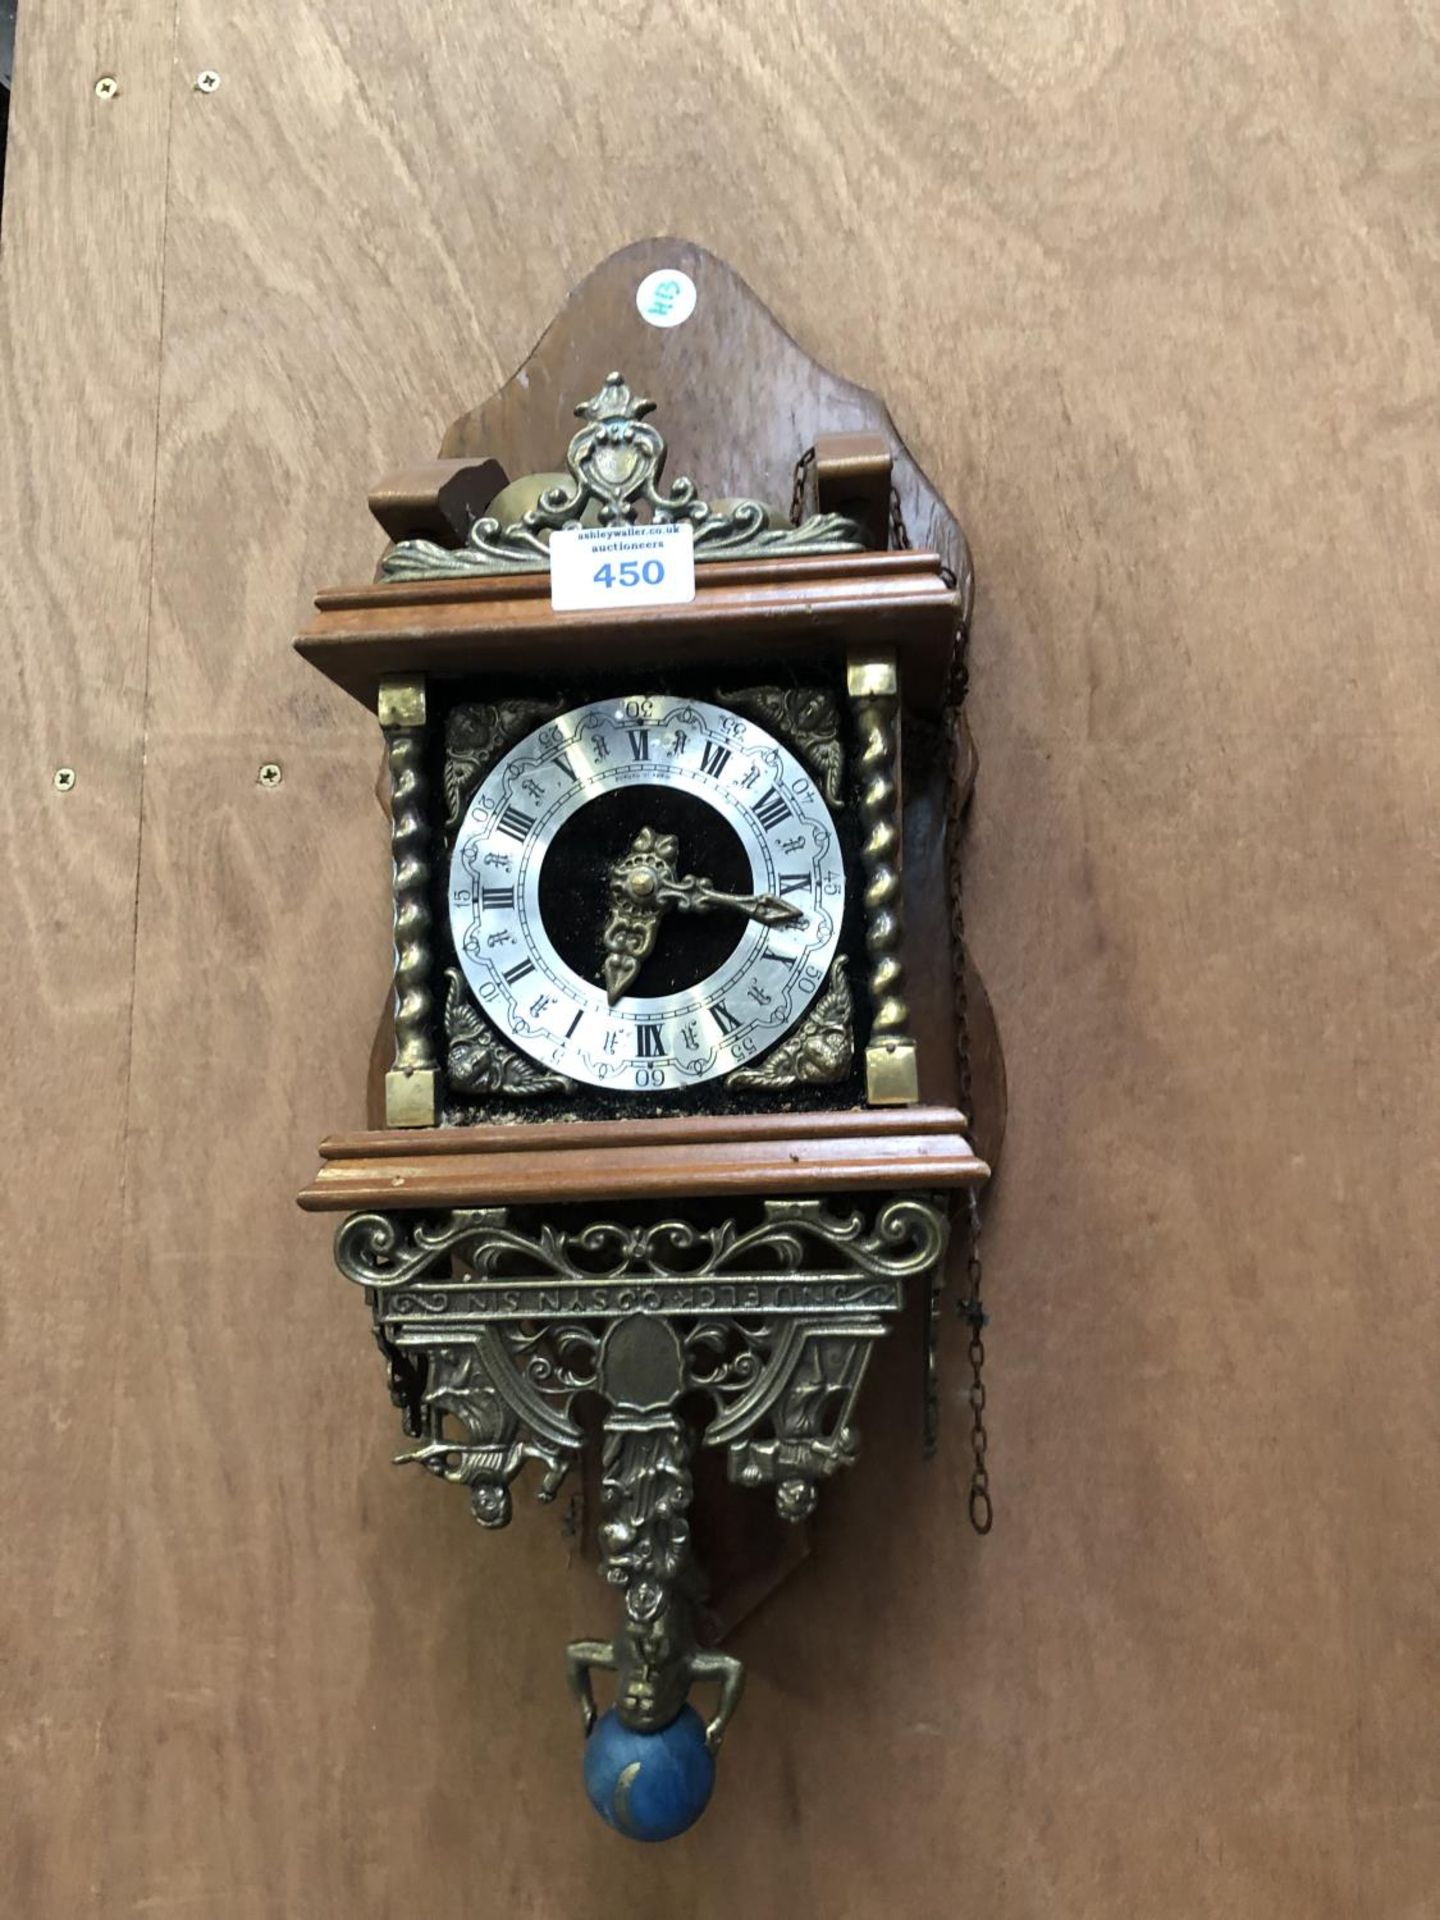 A MAHOGANY AND GILDED WALL CLOCK WITH SILVERISED DIAL